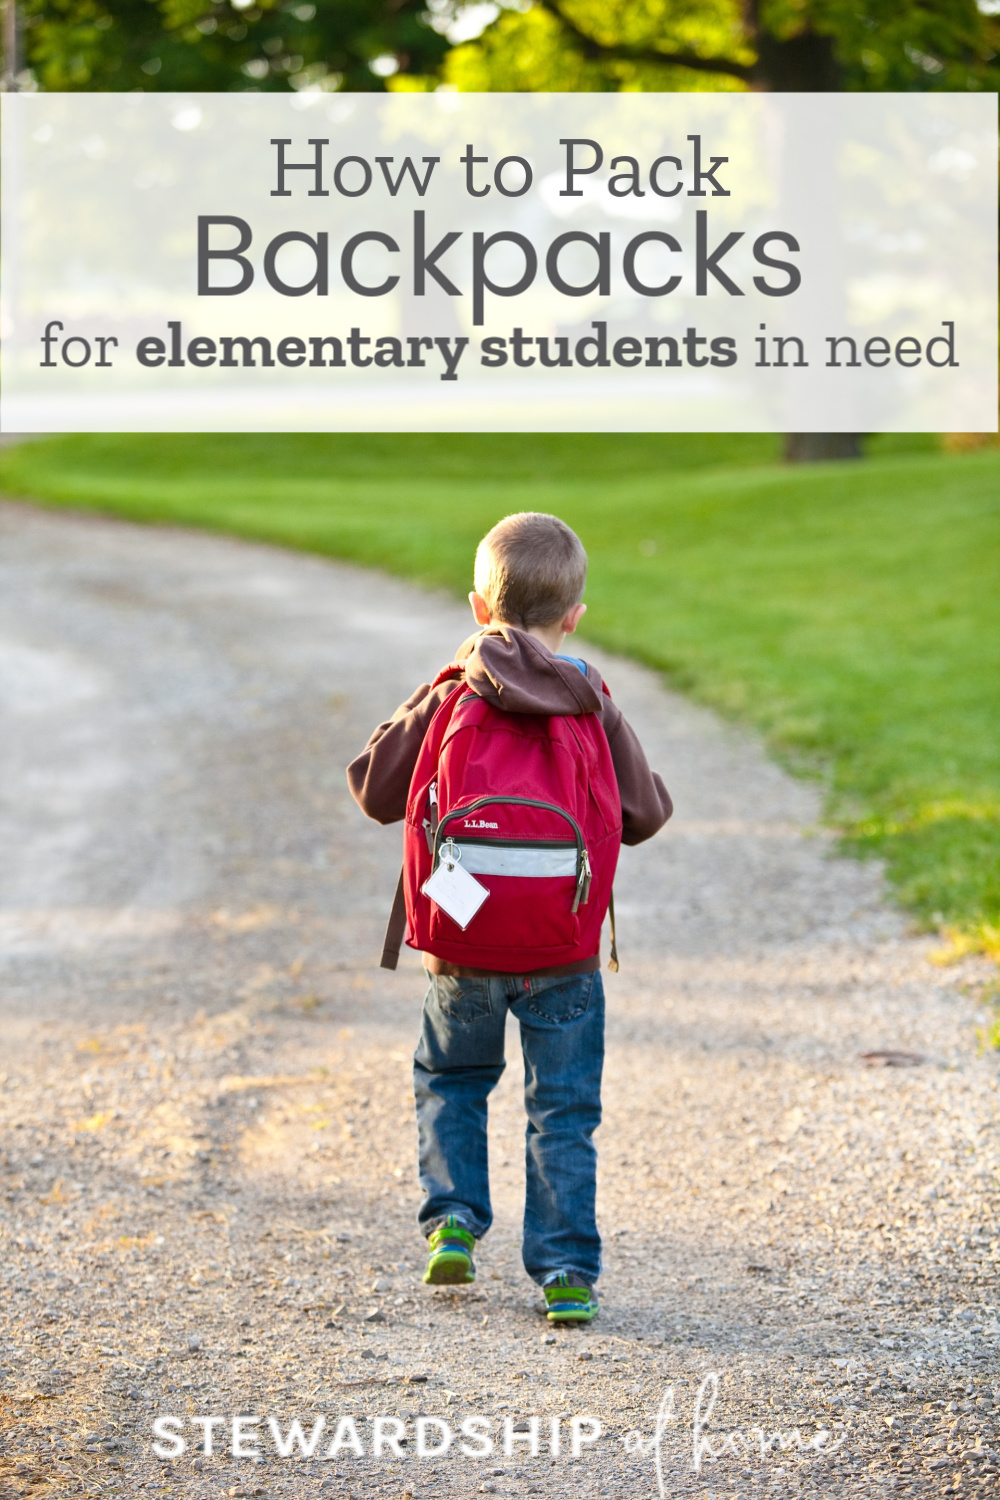 Pack Backpacks for Elementary Students in Need